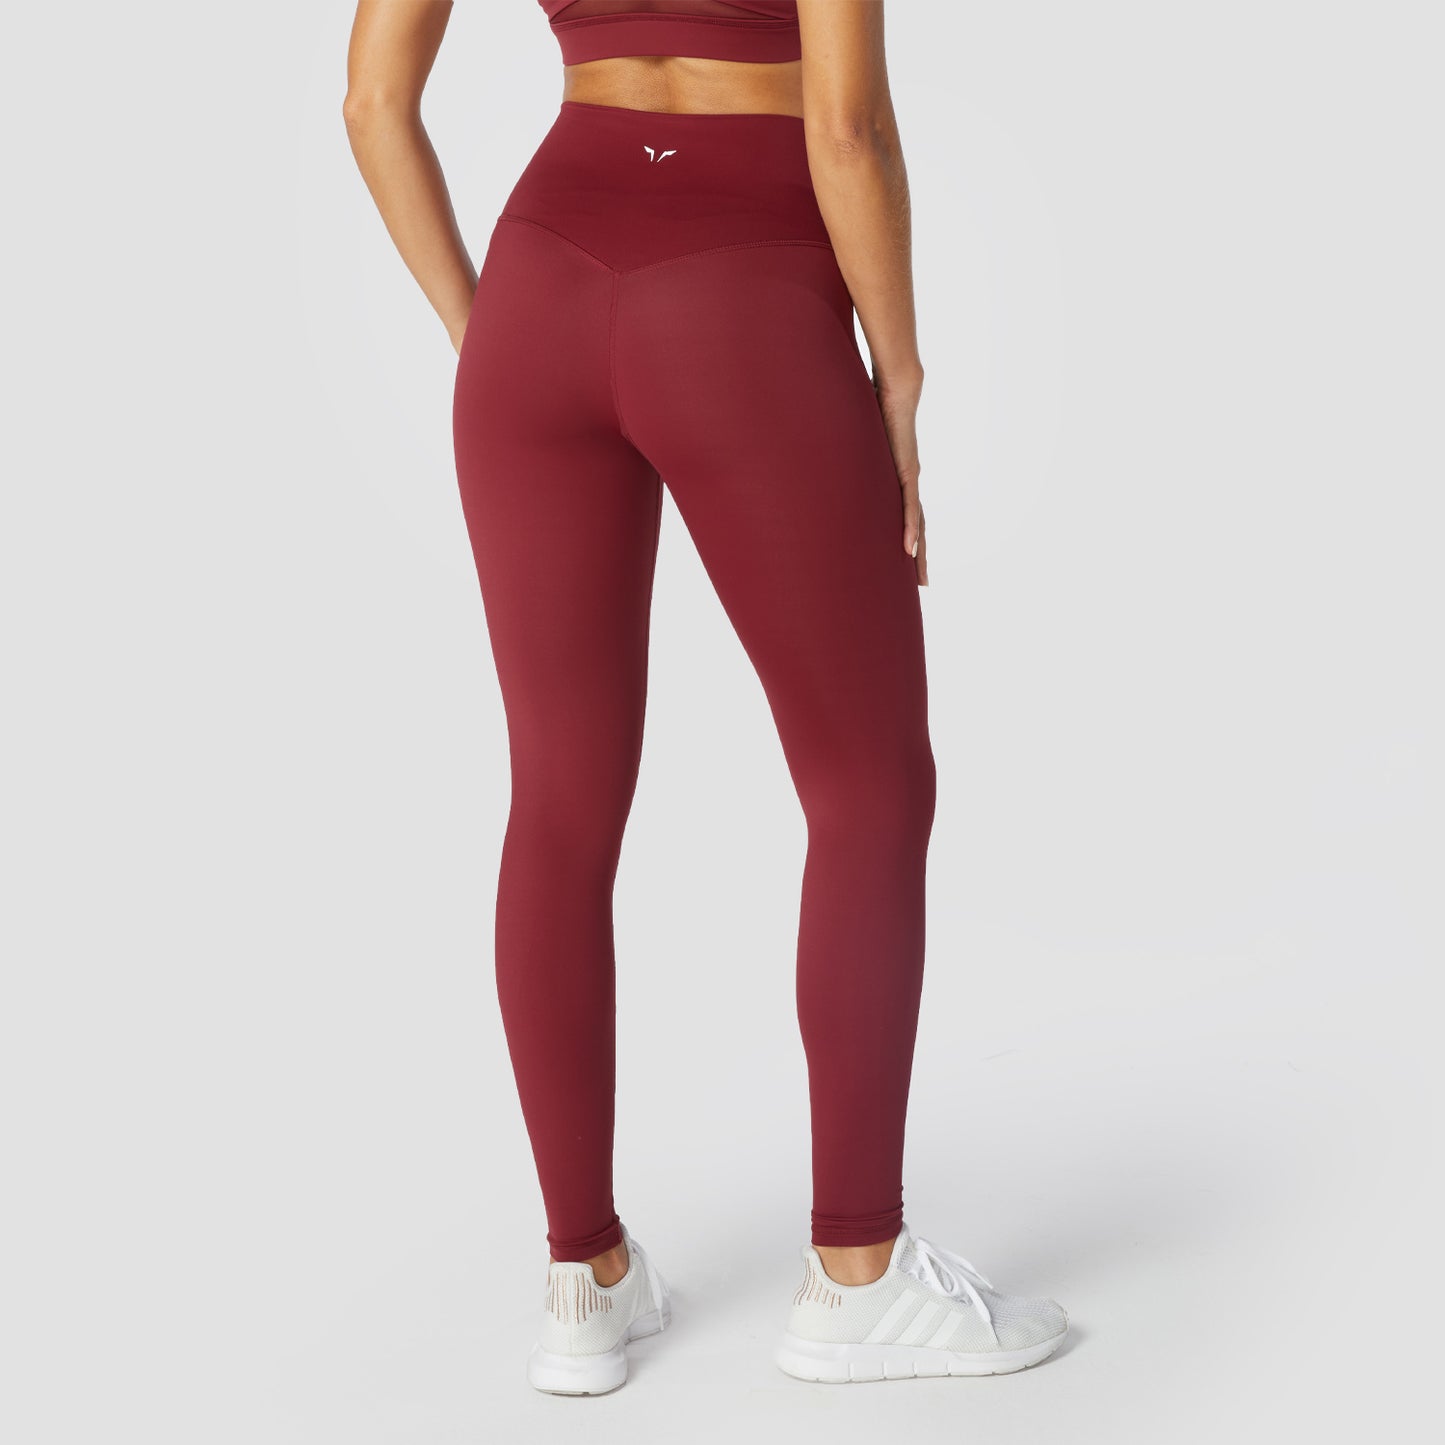 squatwolf-gym-leggings-for-women-core-agile-leggings-red-workout-clothes